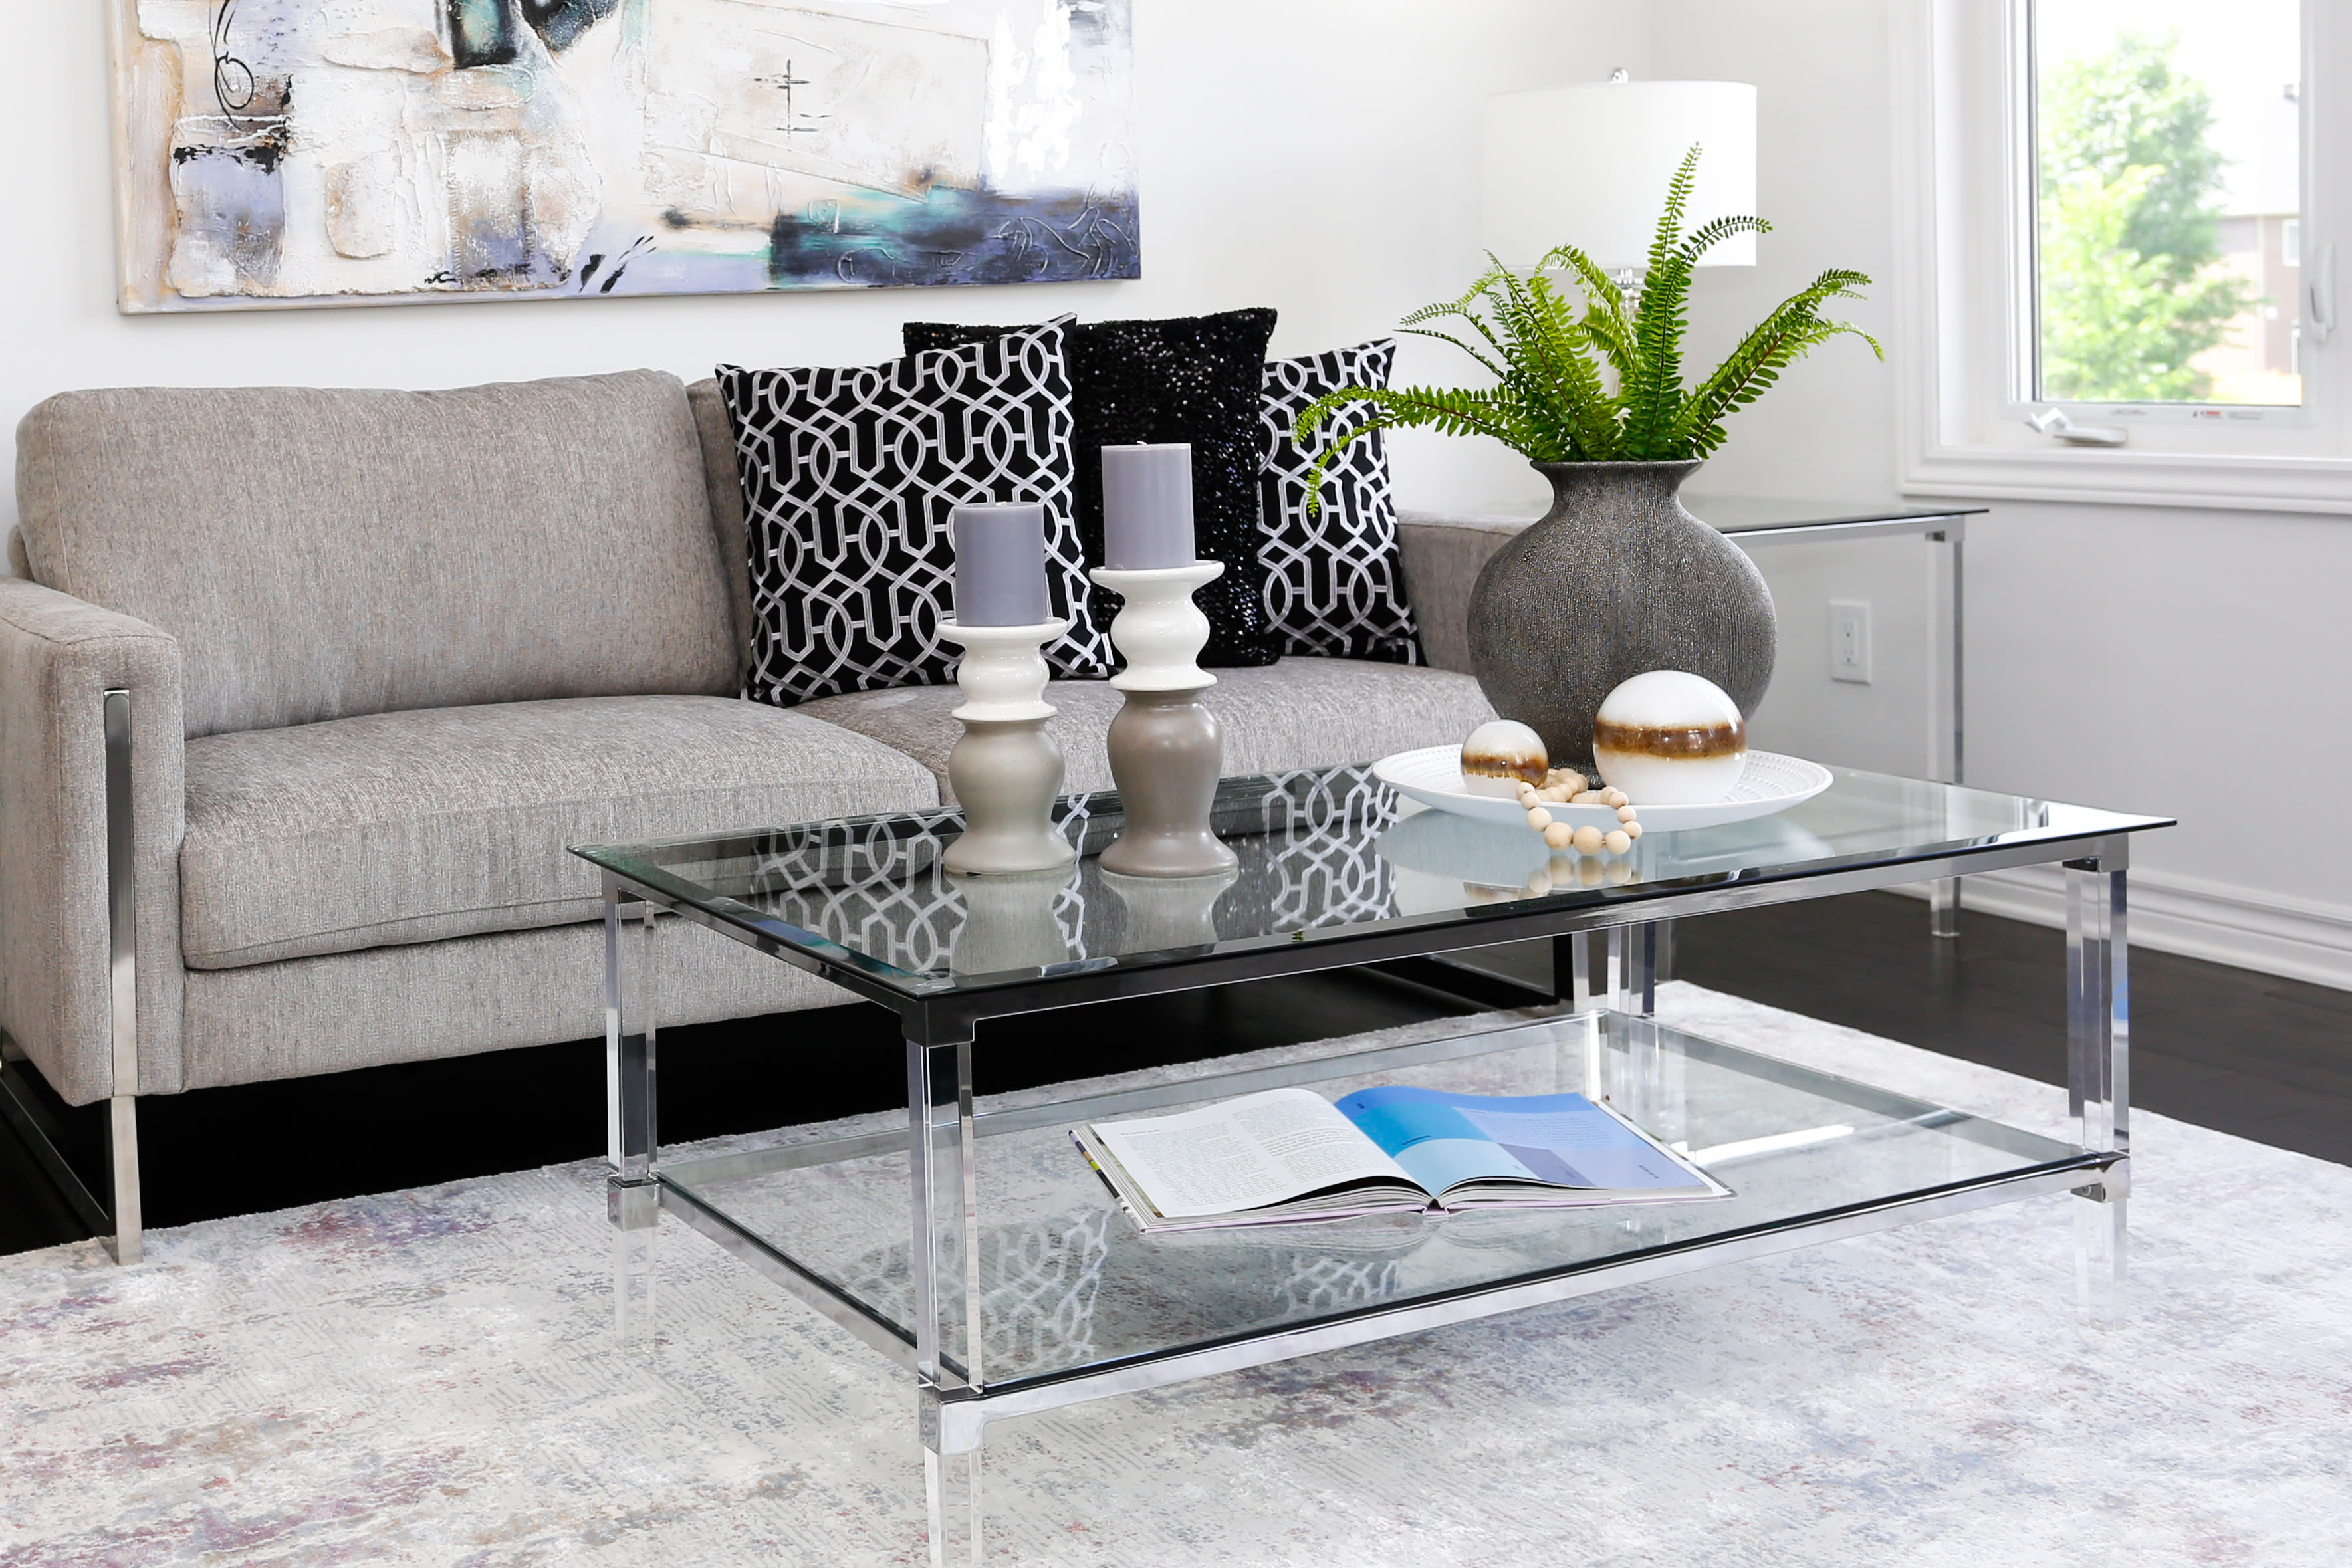 two tiered coffee table decor